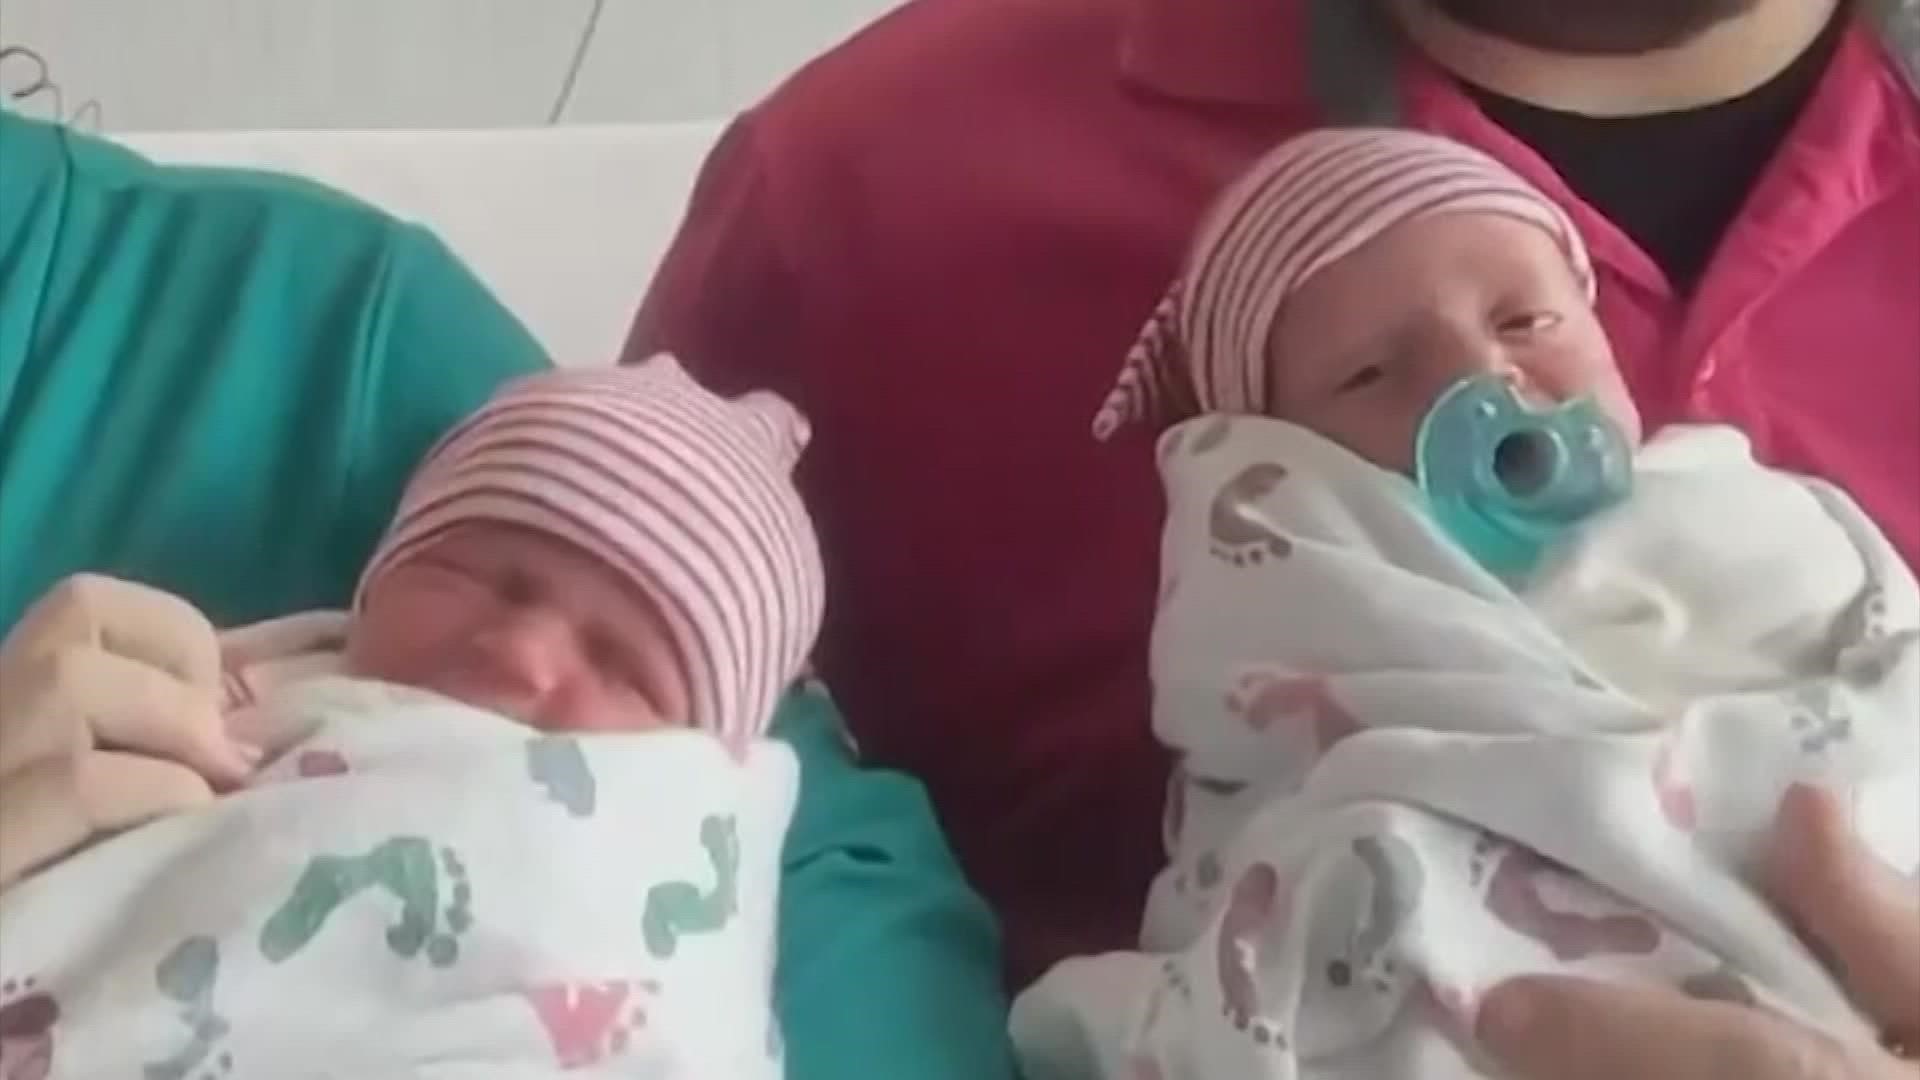 A pair of Texas twin girls have got a lot of people talking. Like most twins, they were born just minutes apart, but these babies are born in two different years.